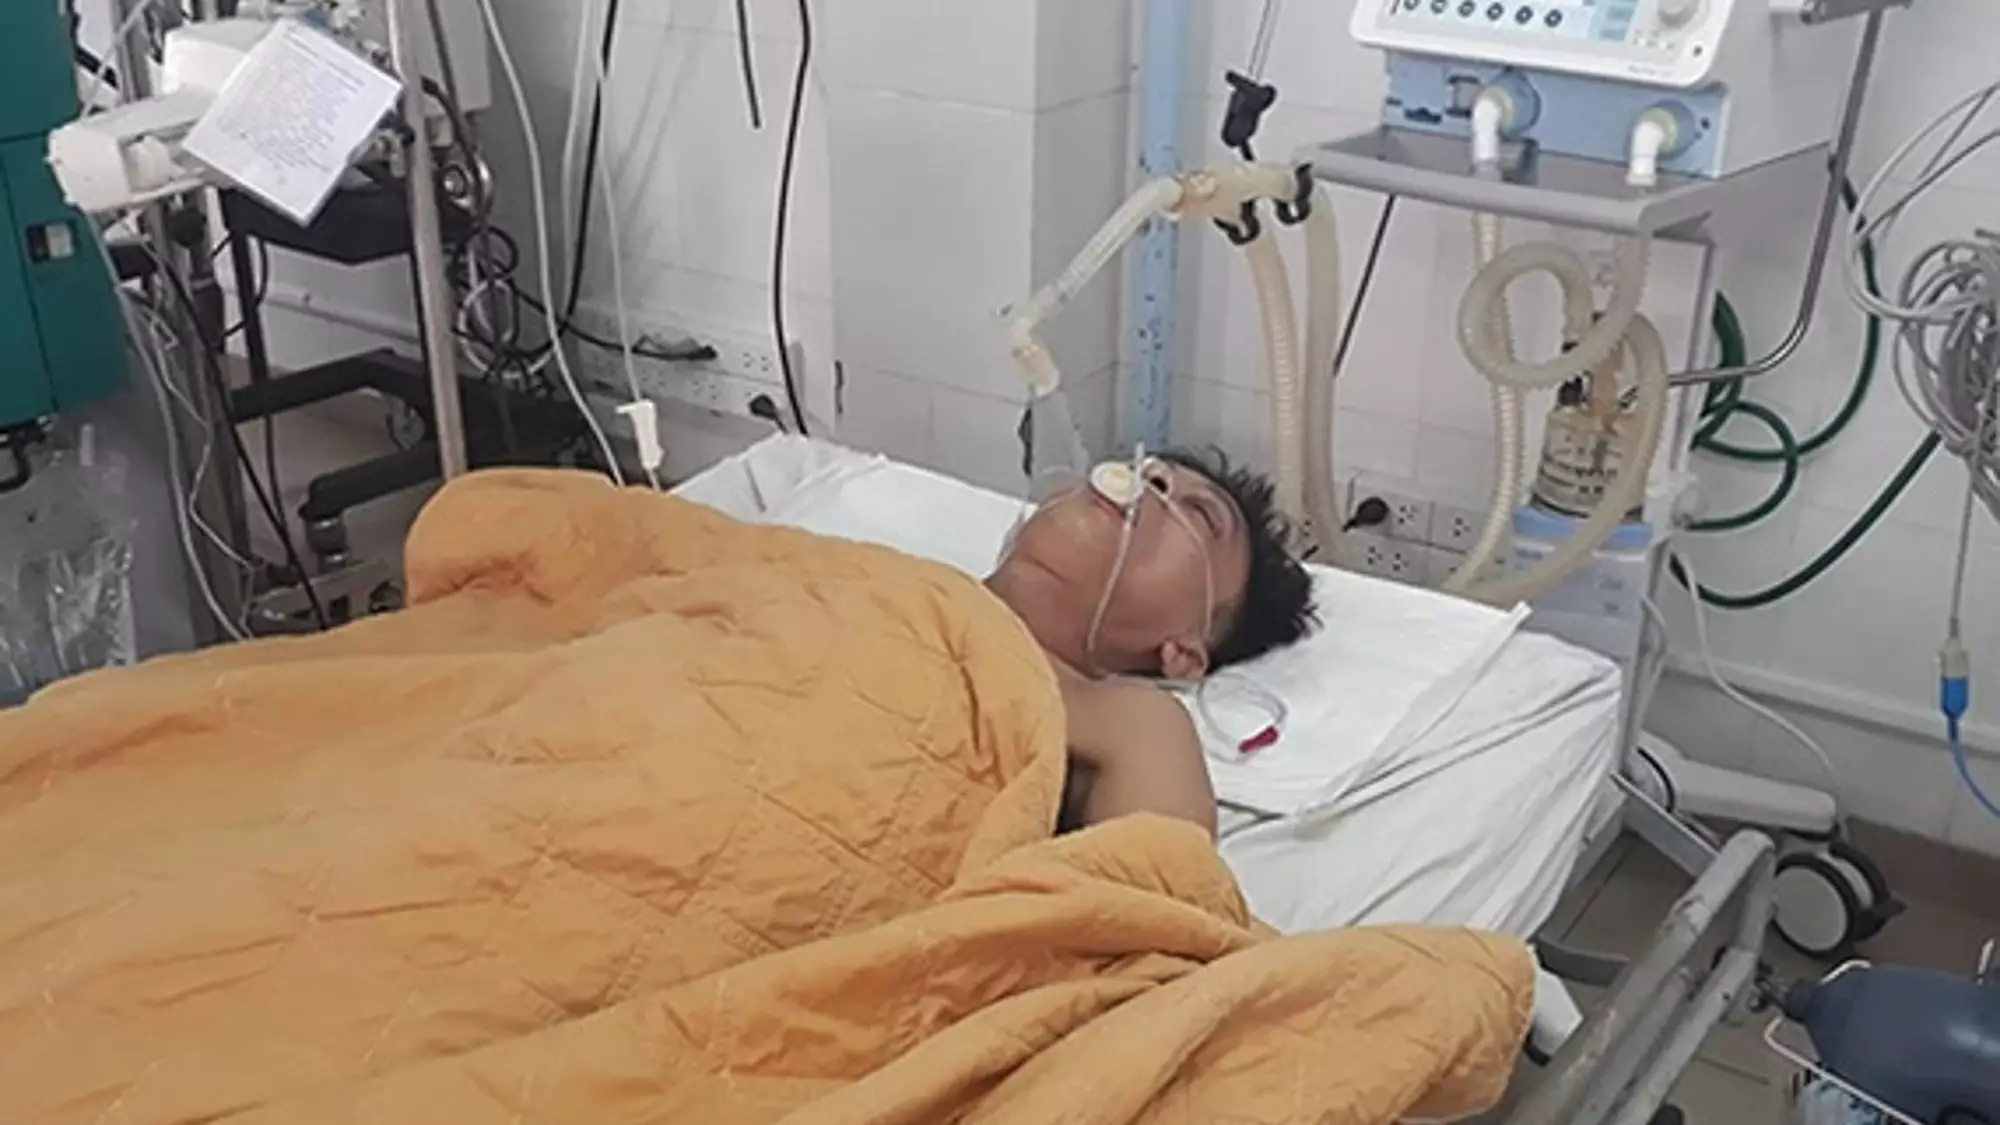 Doctors Save Man From Alcohol Poisoning By Administering 15 Cans Of Beer